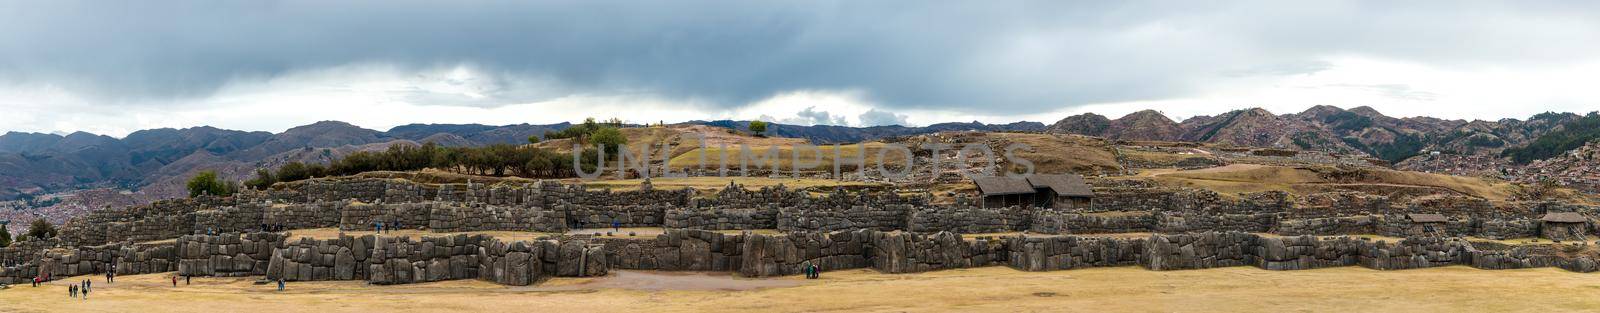 Saksaywaman, the ruined citadel on the northern outskirts of Cusco, Peru, the lost capital of Incan empire